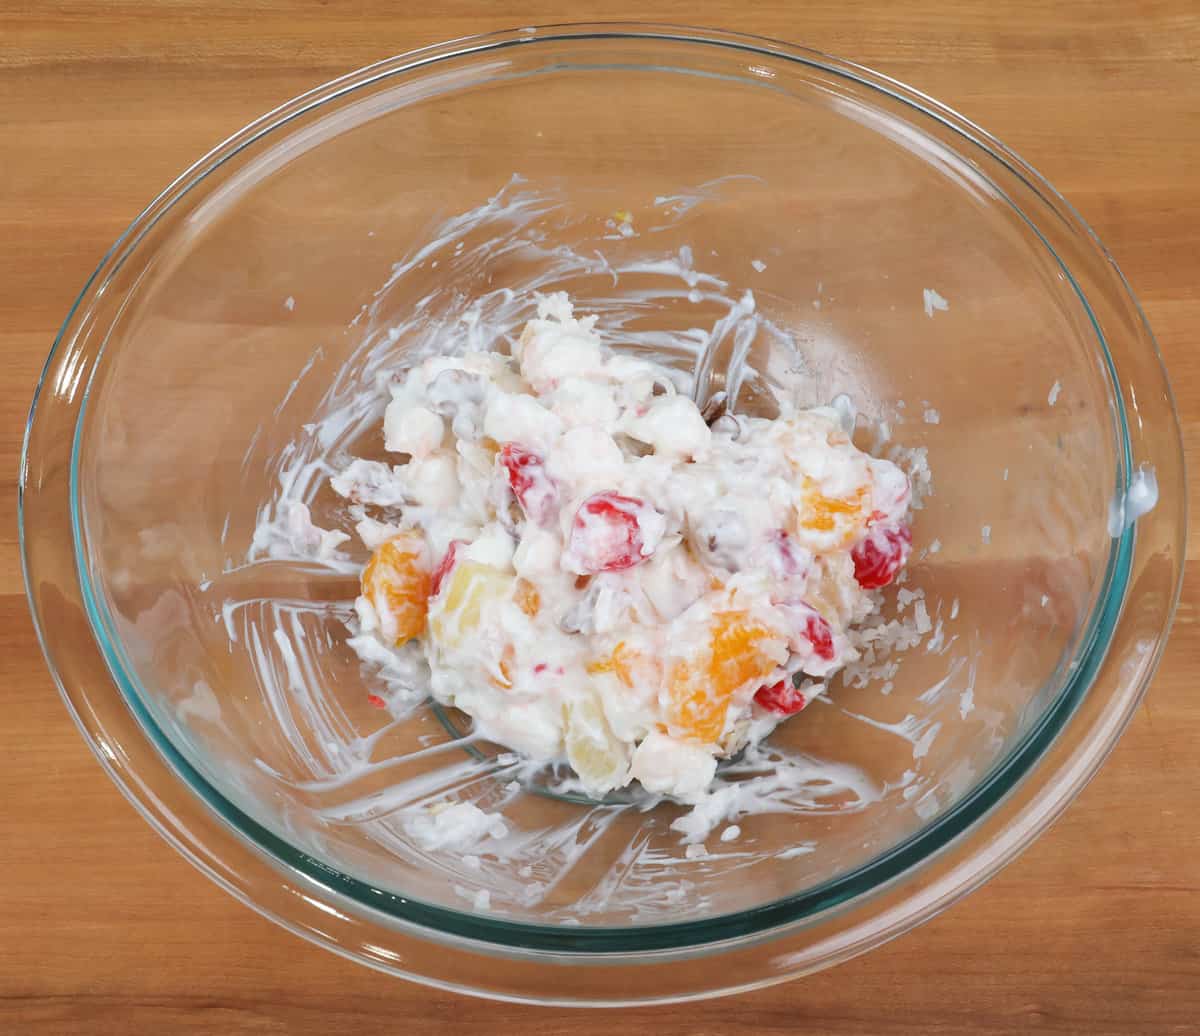 an ambrosia salad in a mixing bowl on a kitchen counter